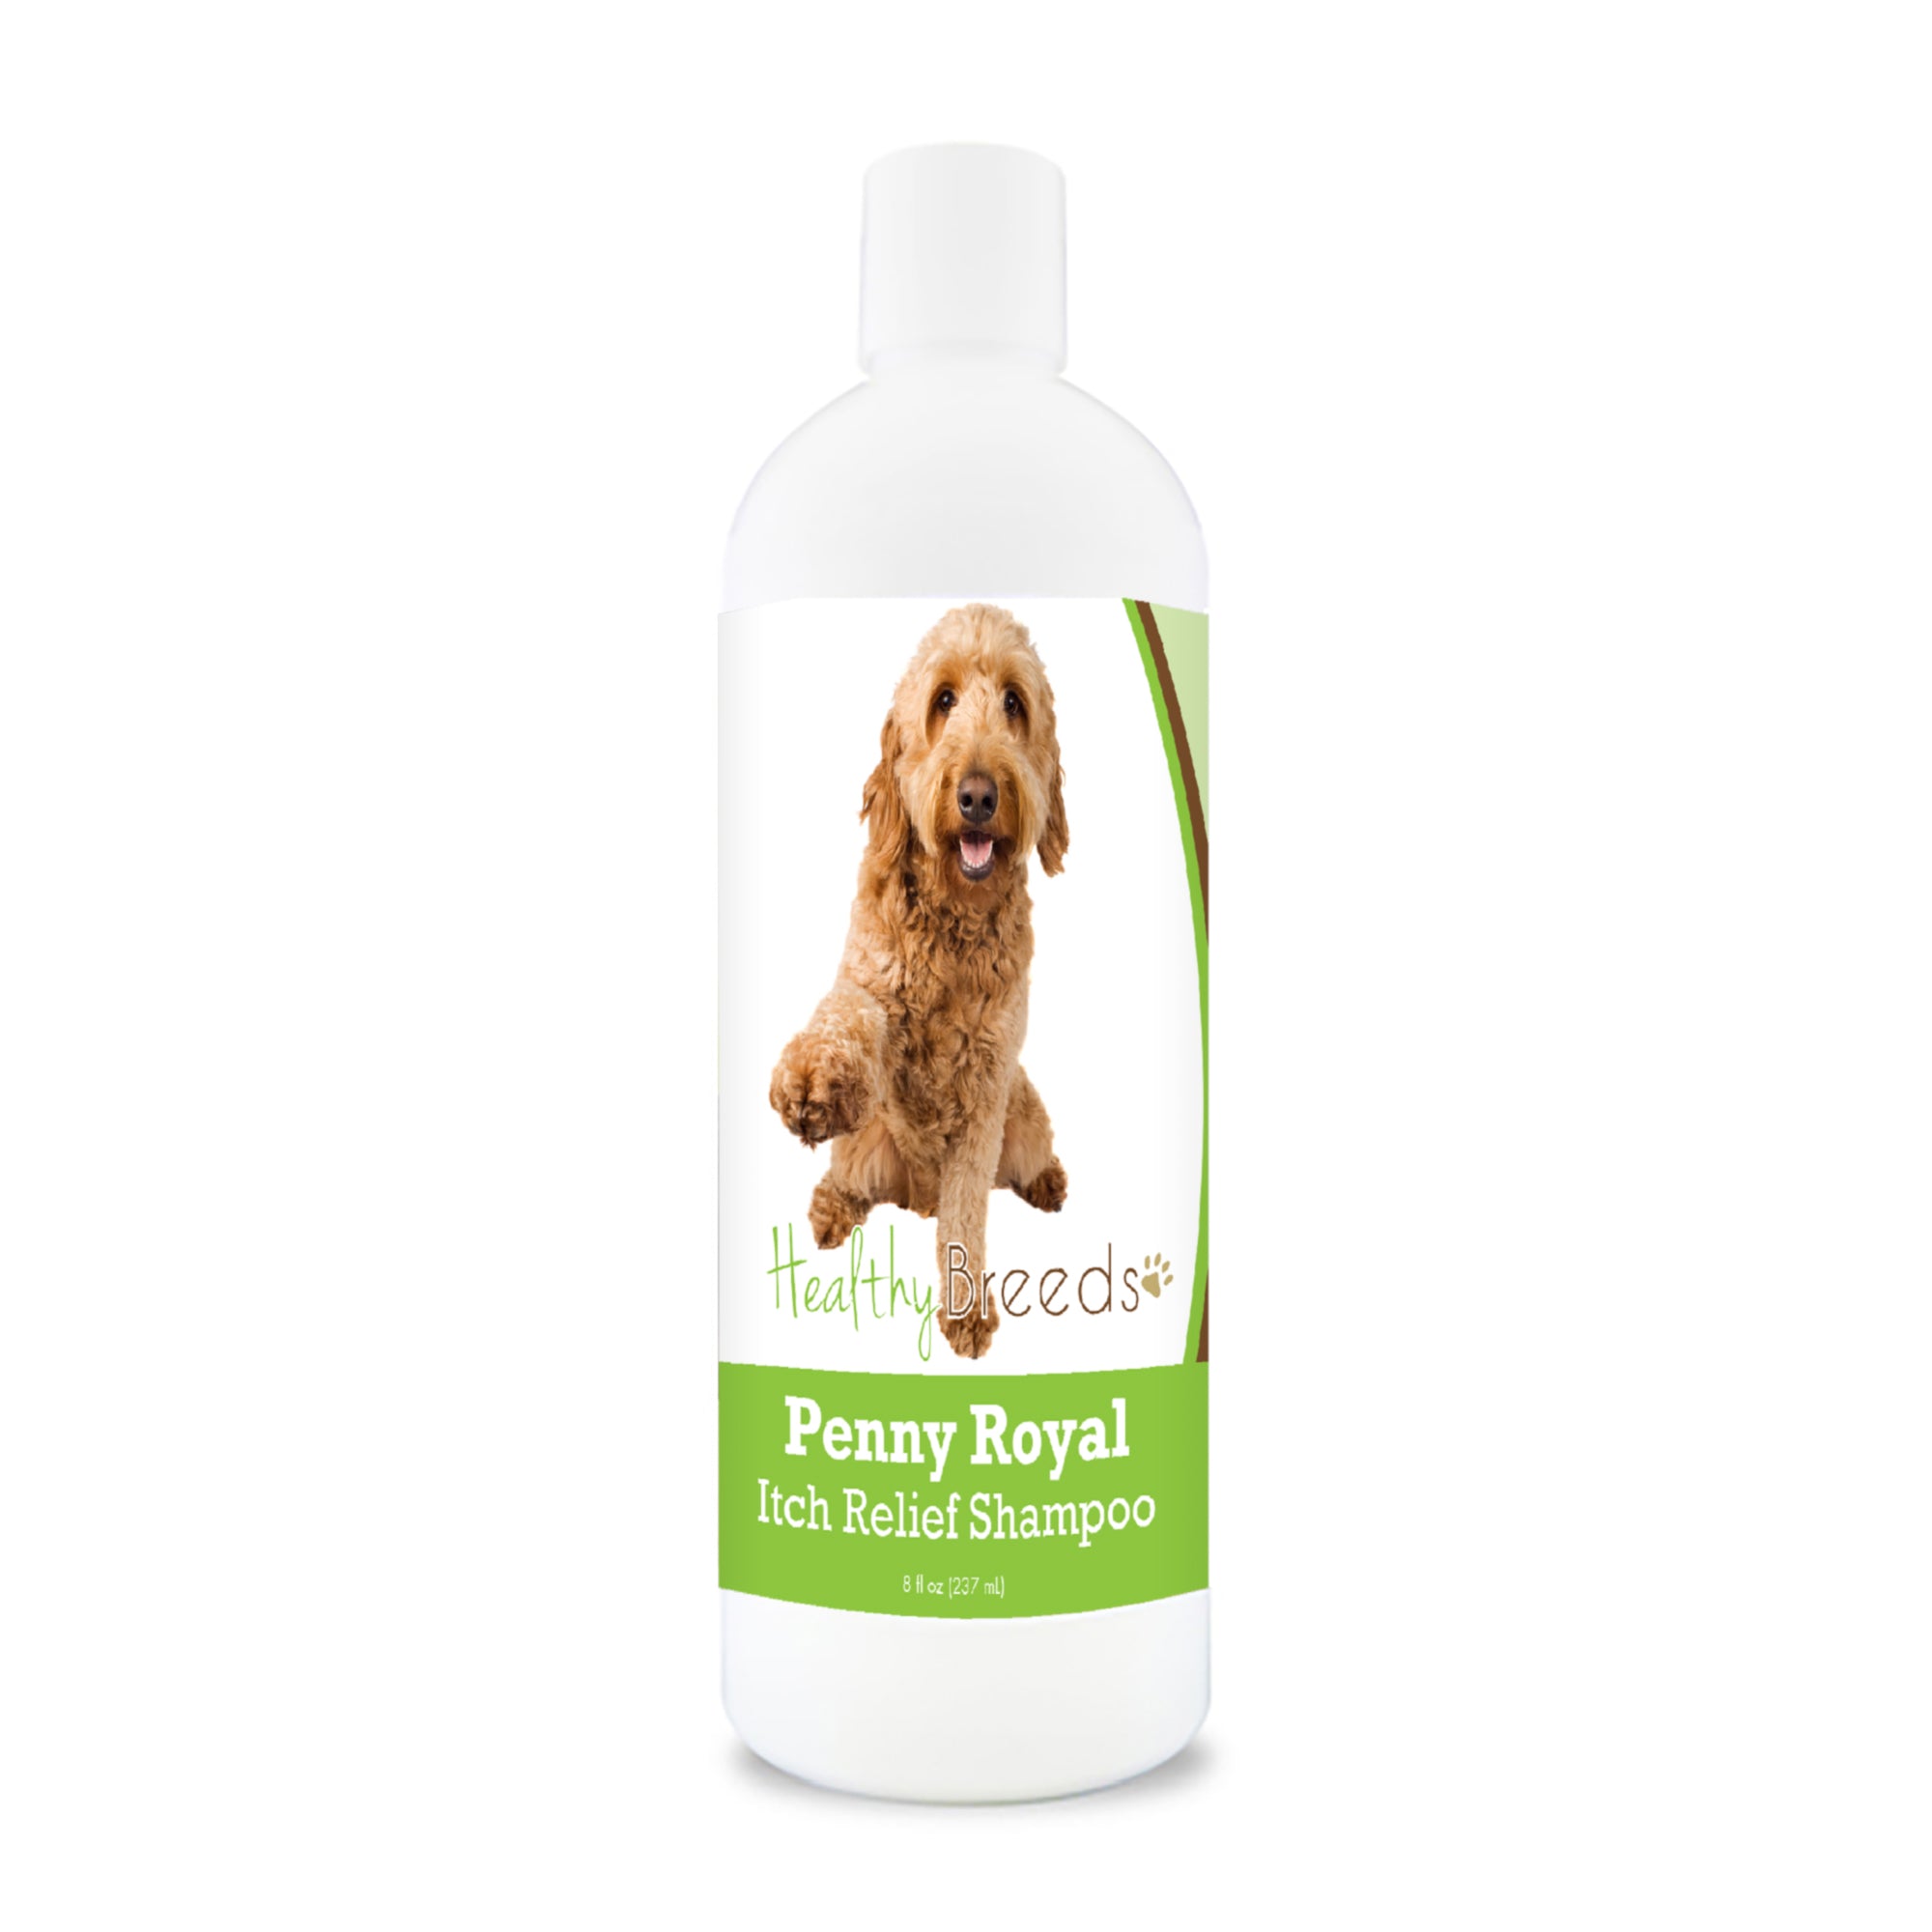 Goldendoodle Penny Royal Itch Relief Shampoo 8 oz